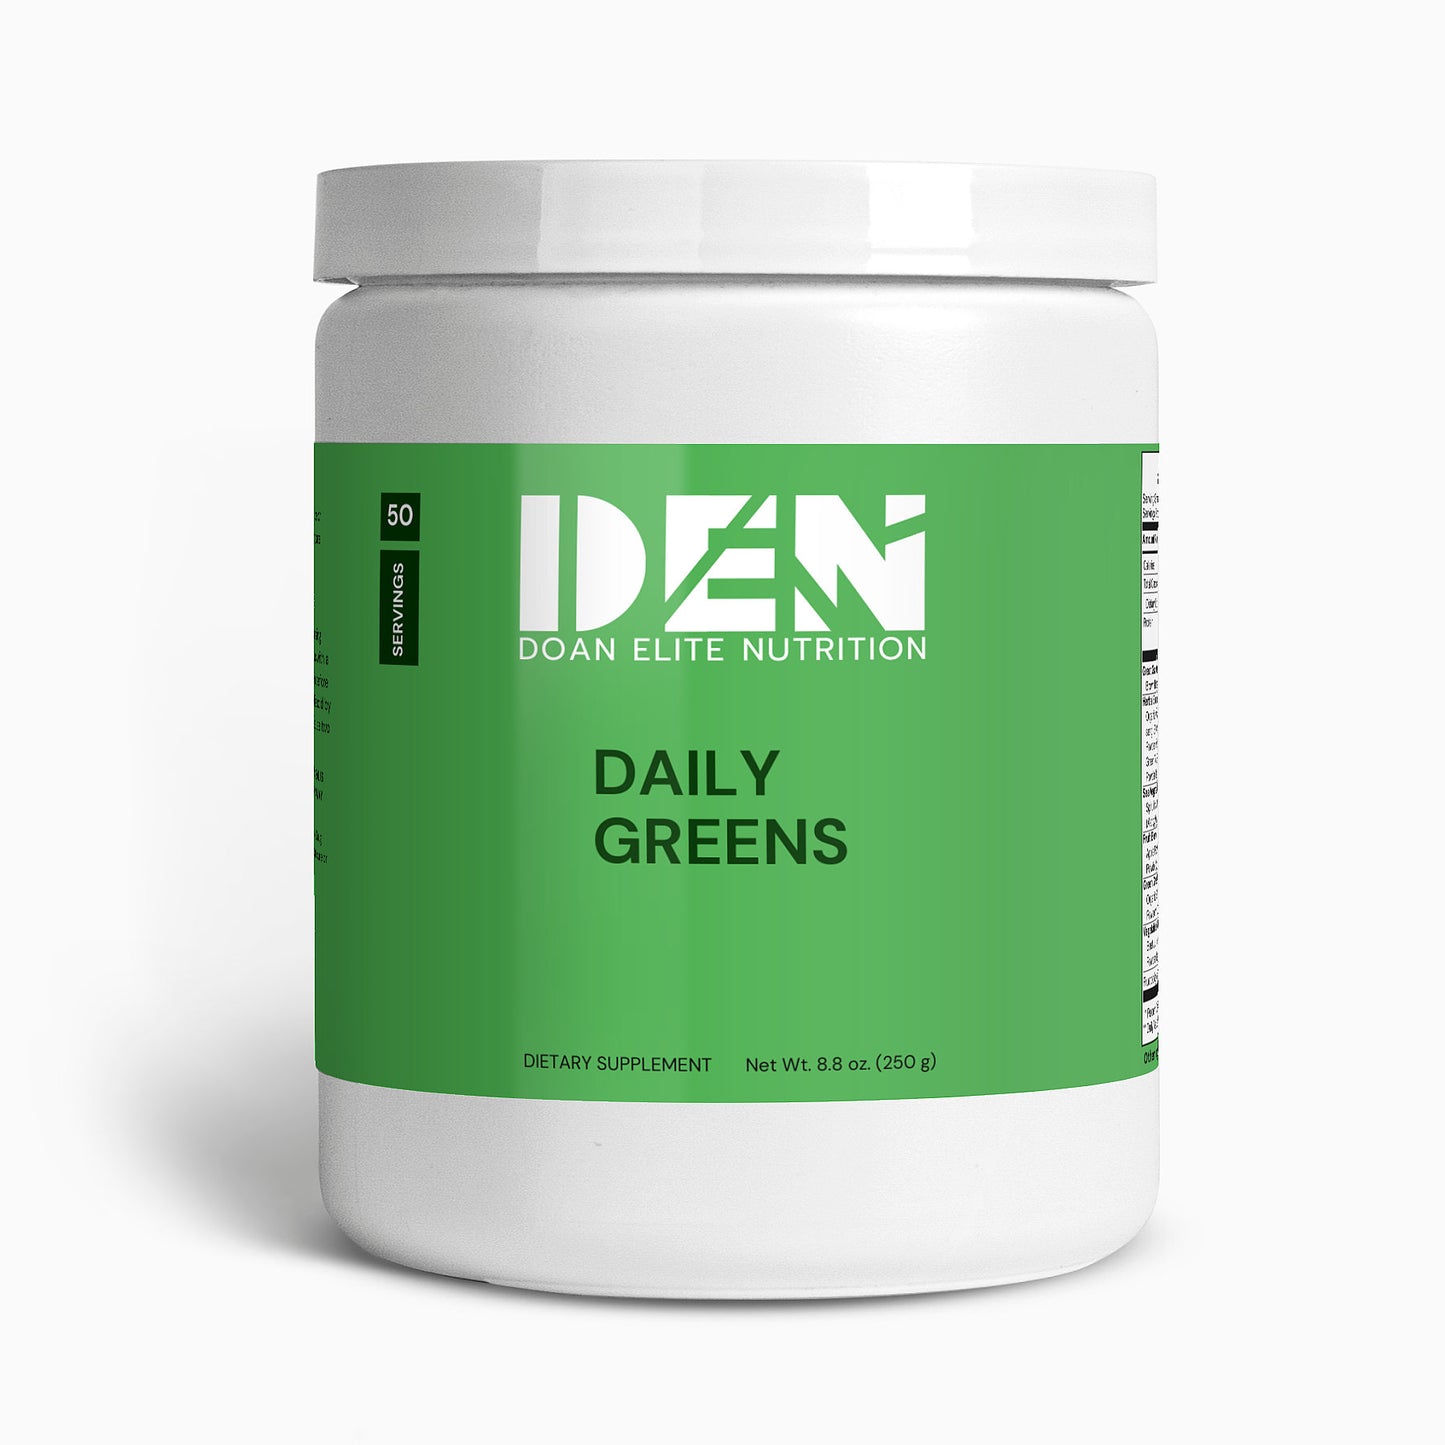 Doan Elite Nutrition Daily Greens: Meticulously crafted blend of organic grasses, superfoods, B-Vitamins, and botanical extracts, this whole-food formula boosts mental and physical functionality. Packed with nature's finest offerings.